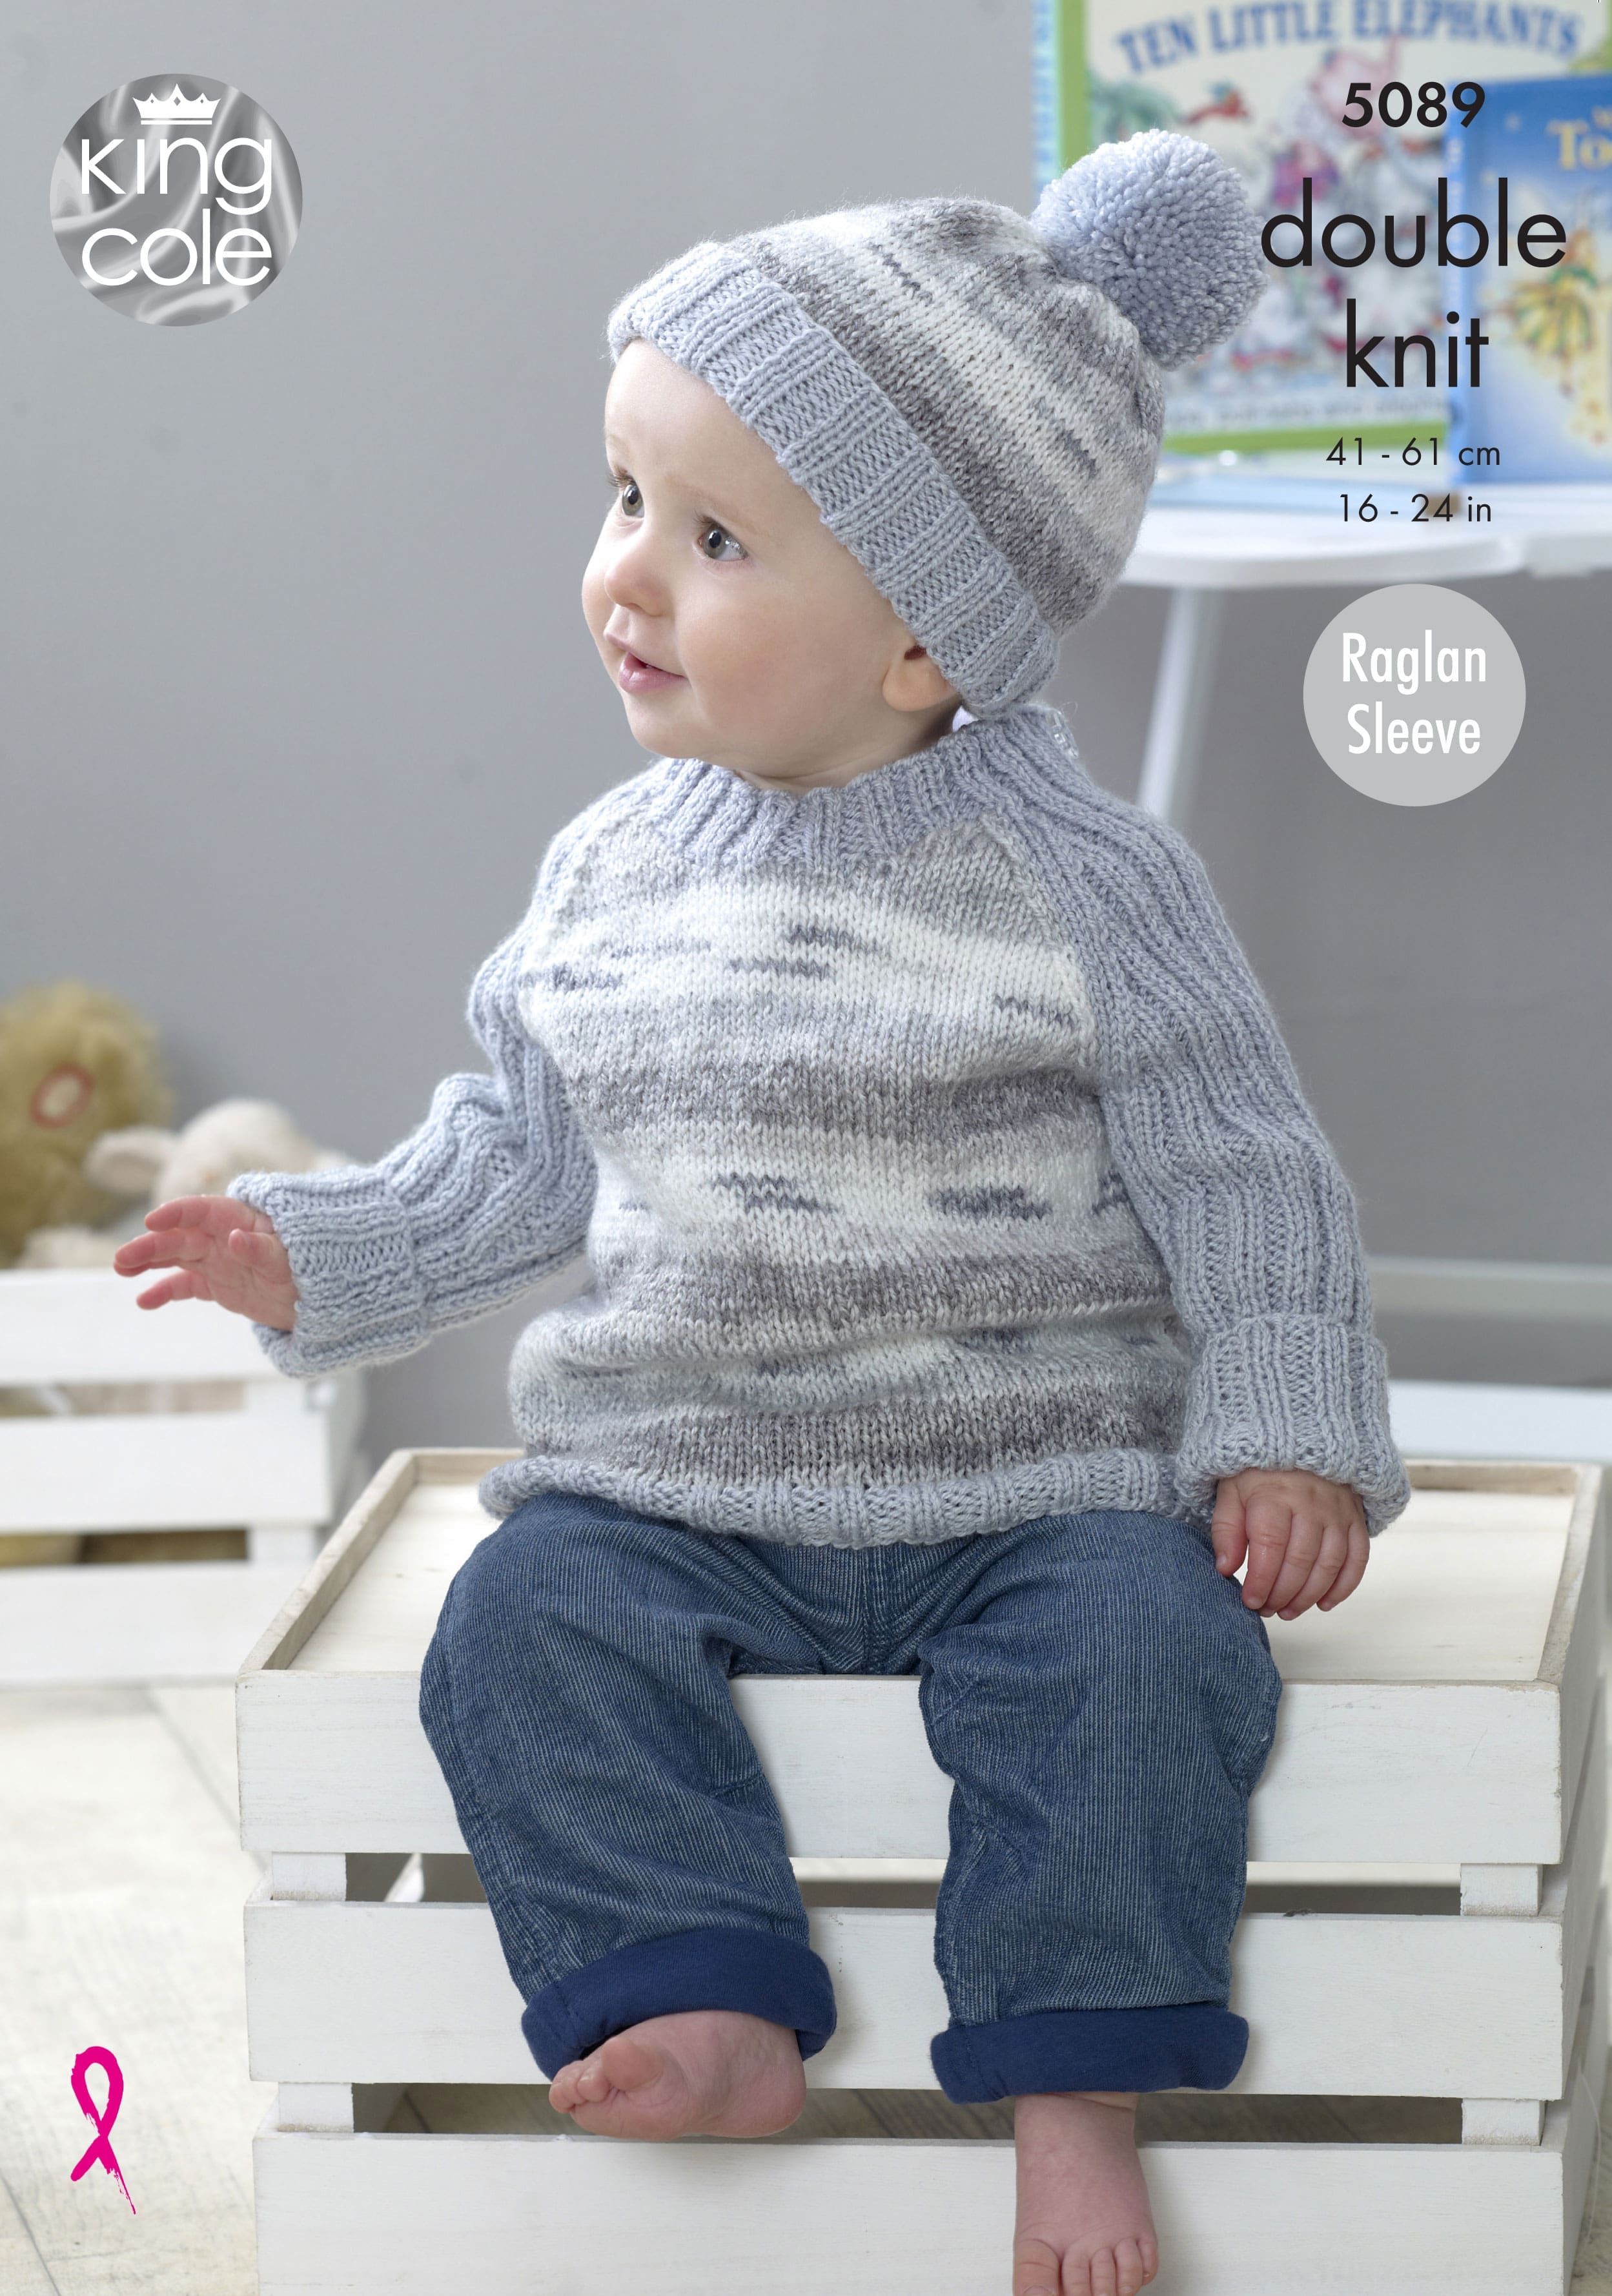 Easy to Follow Cardigan, Sweaters & Hat Knitted in Splash and Big Value ...